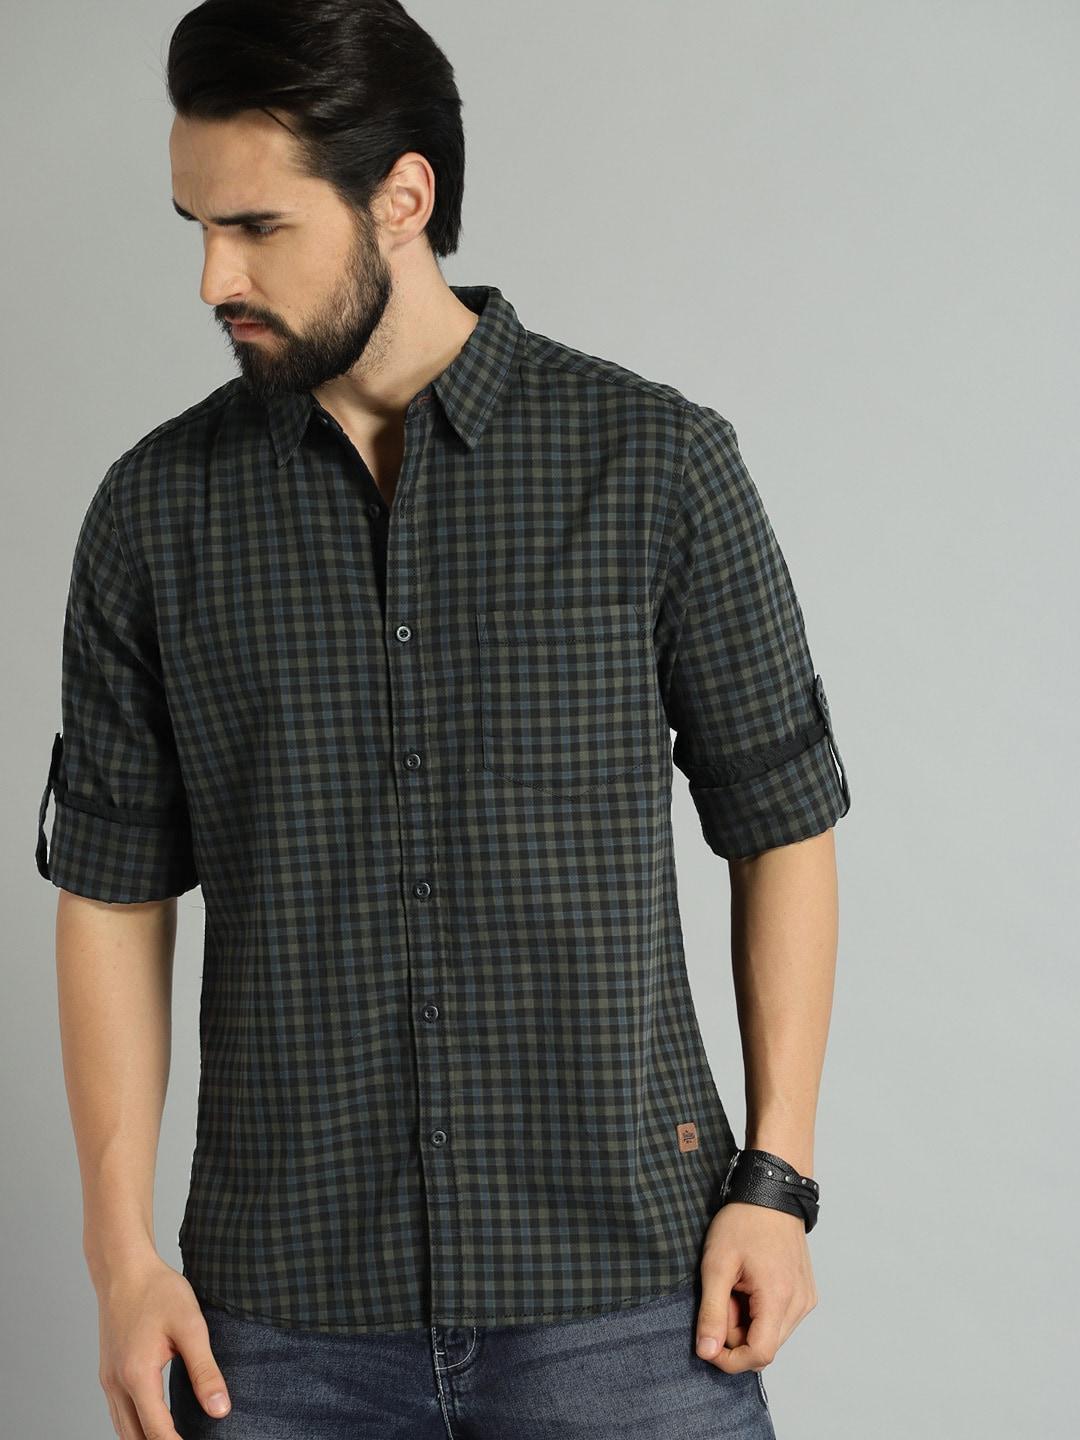 The Roadster Lifestyle Co Men Olive Green & Black Regular Fit Checked Sustainable Casual Shirt